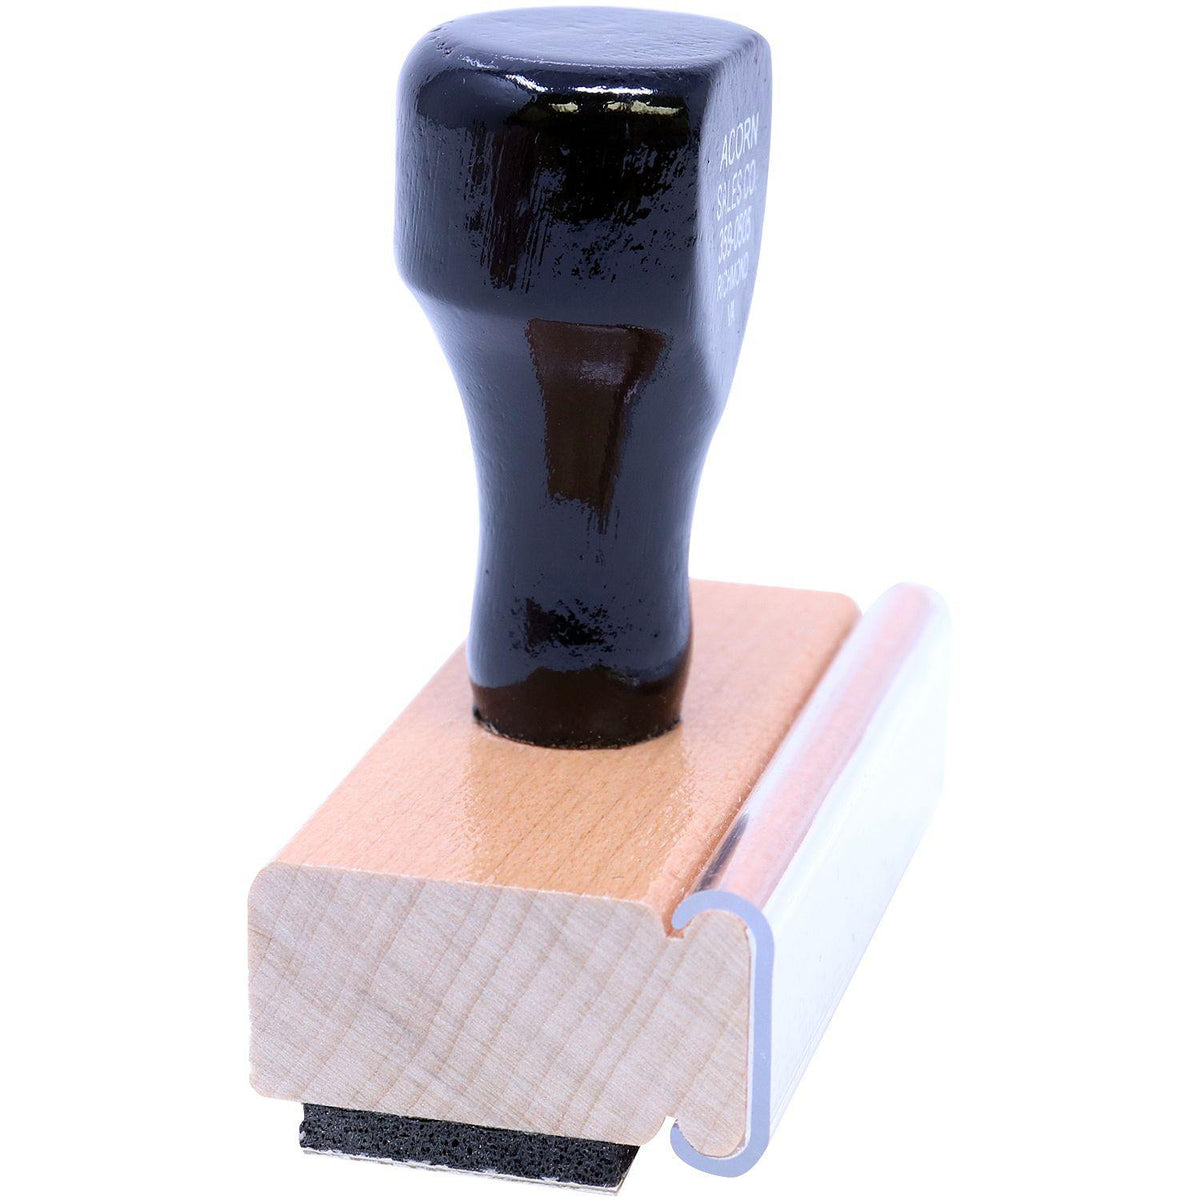 Side View of Large Quarantine Rubber Stamp at an Angle